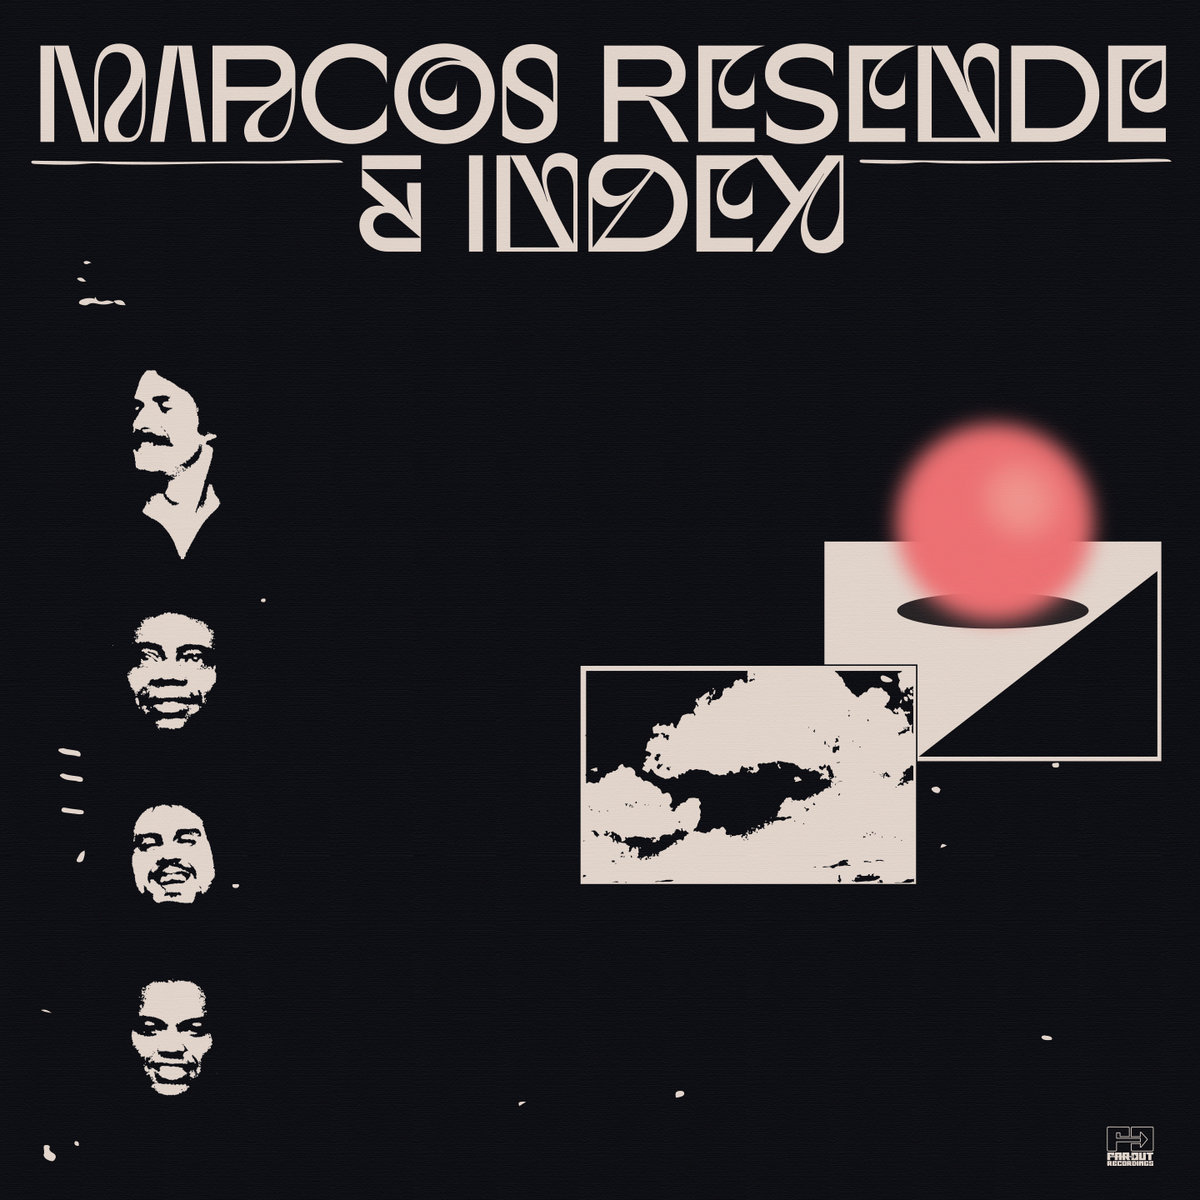 '...‘Behind the Moon’ is a brilliantly wonky pop piece of the ‘Mother Earth’s Plantasia’ variety. From a recently “unearthed” self-titled debut album recorded in Rio de Janeiro in 1976 from progressive Brazilian instrumental musician Marcos Resende.' birthdaycakebreakfast.wordpress.com/2024/02/01/lis…